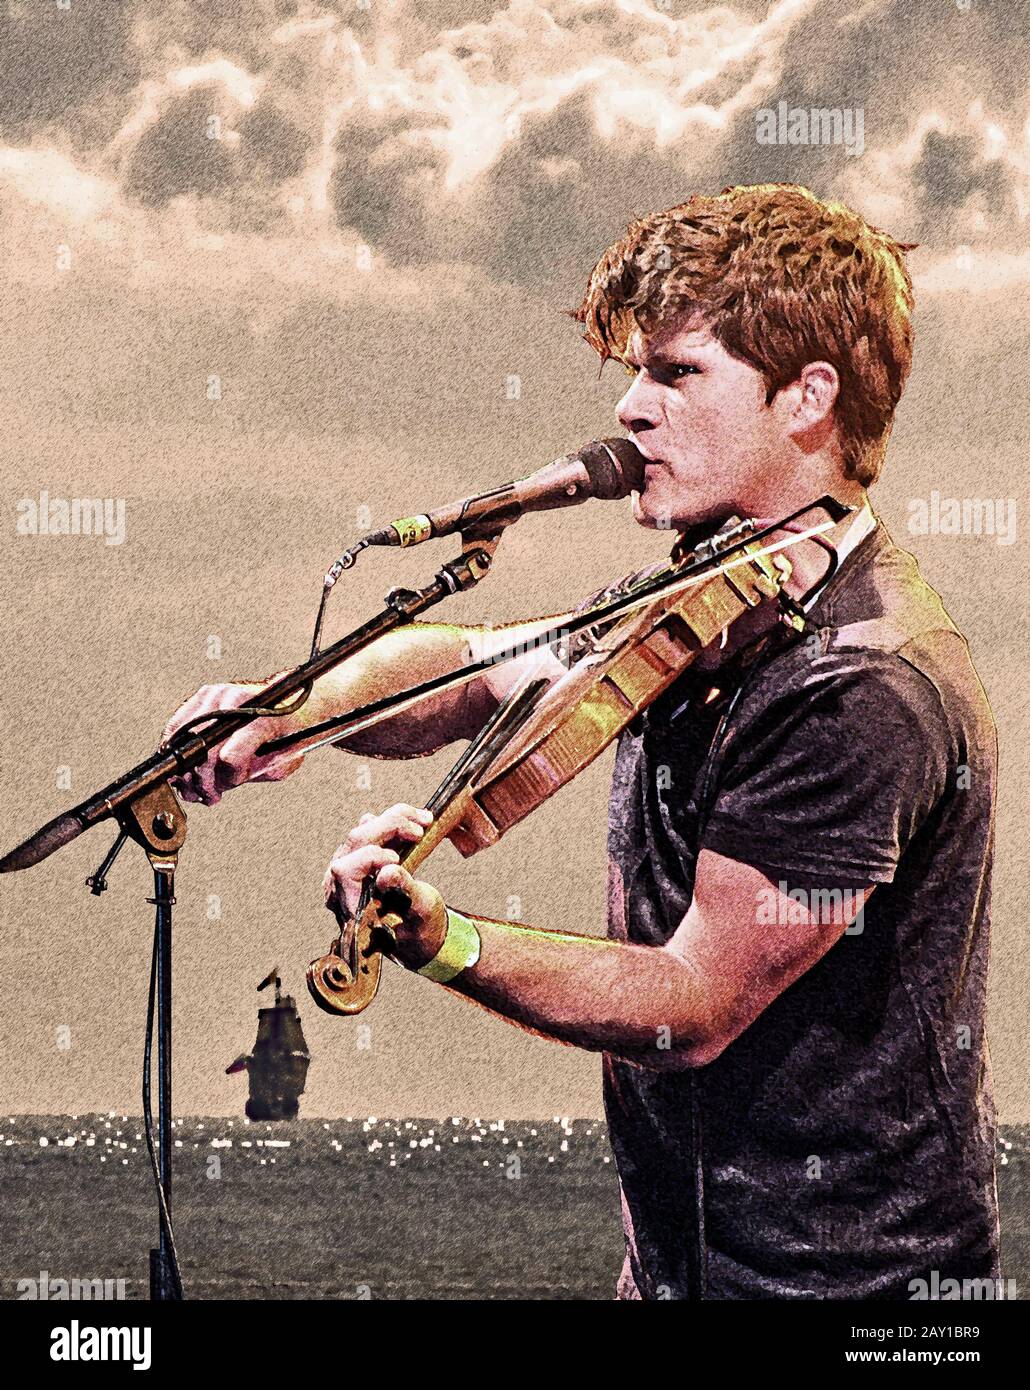 Seth Lakeman, folk singer and writer in a photo illustration image with sailing ship in background Stock Photo